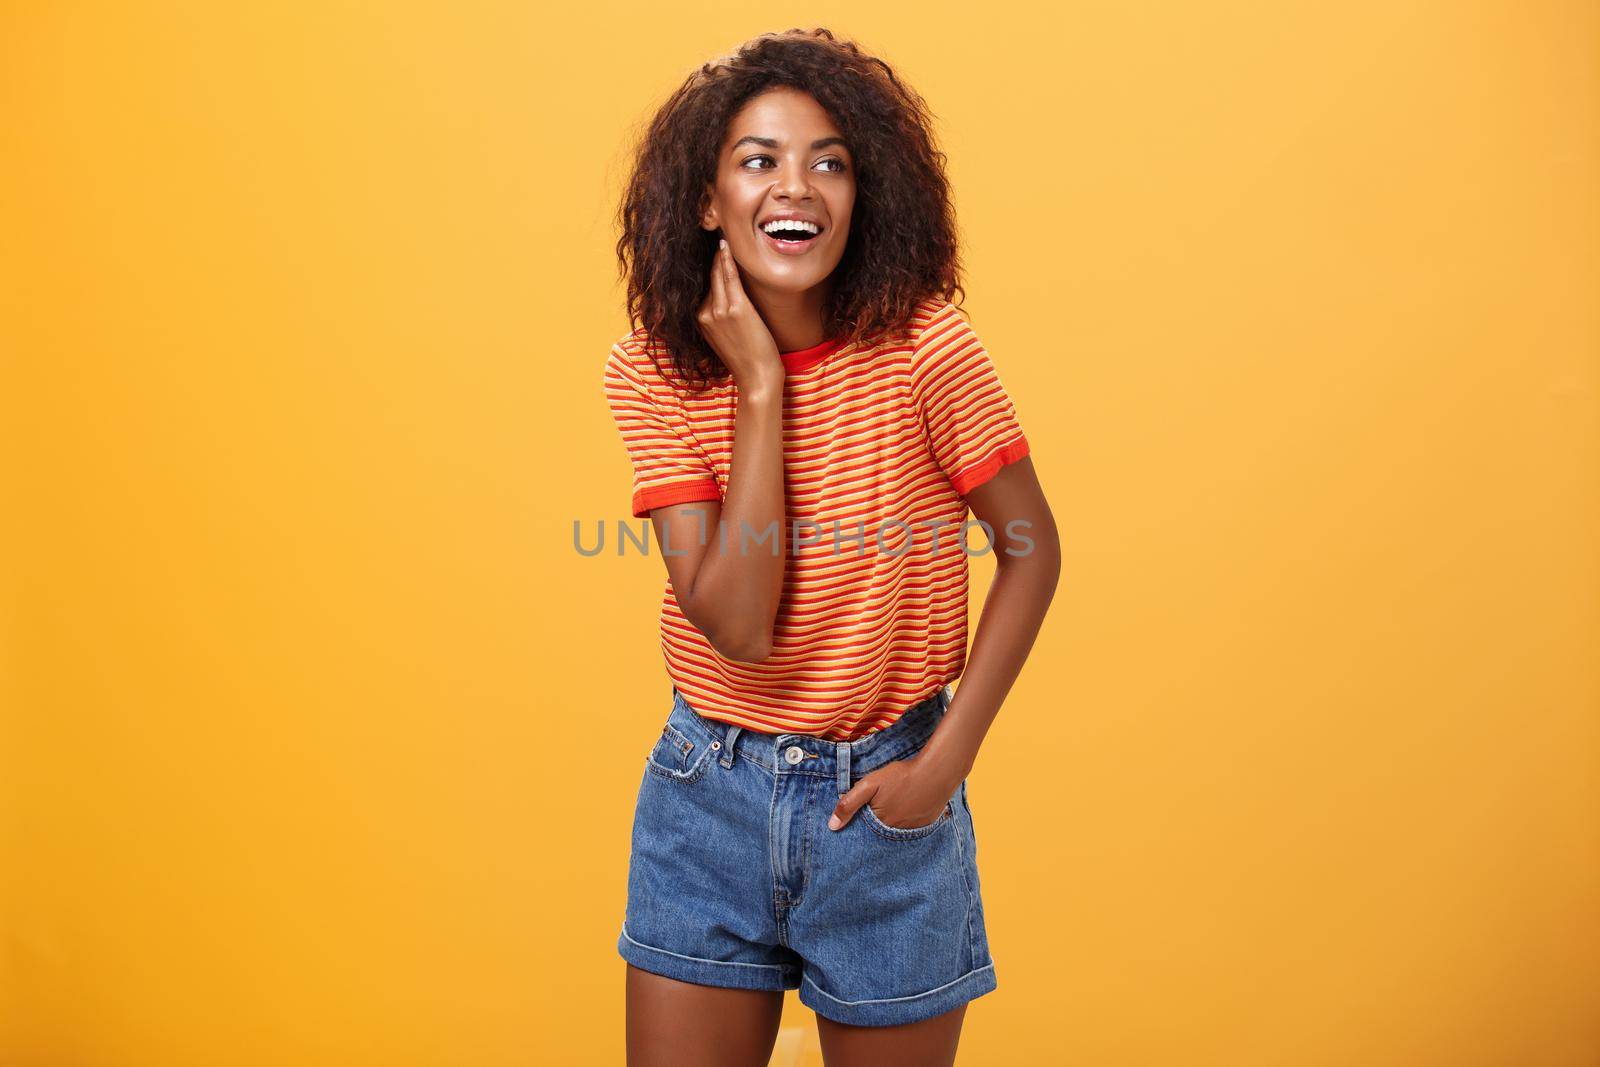 Stylish feminine and fashionable african american female model with afro hairstyle touching neck gently looking right with amused carefree expression holding hand in pocket over orange background. Lifestyle.